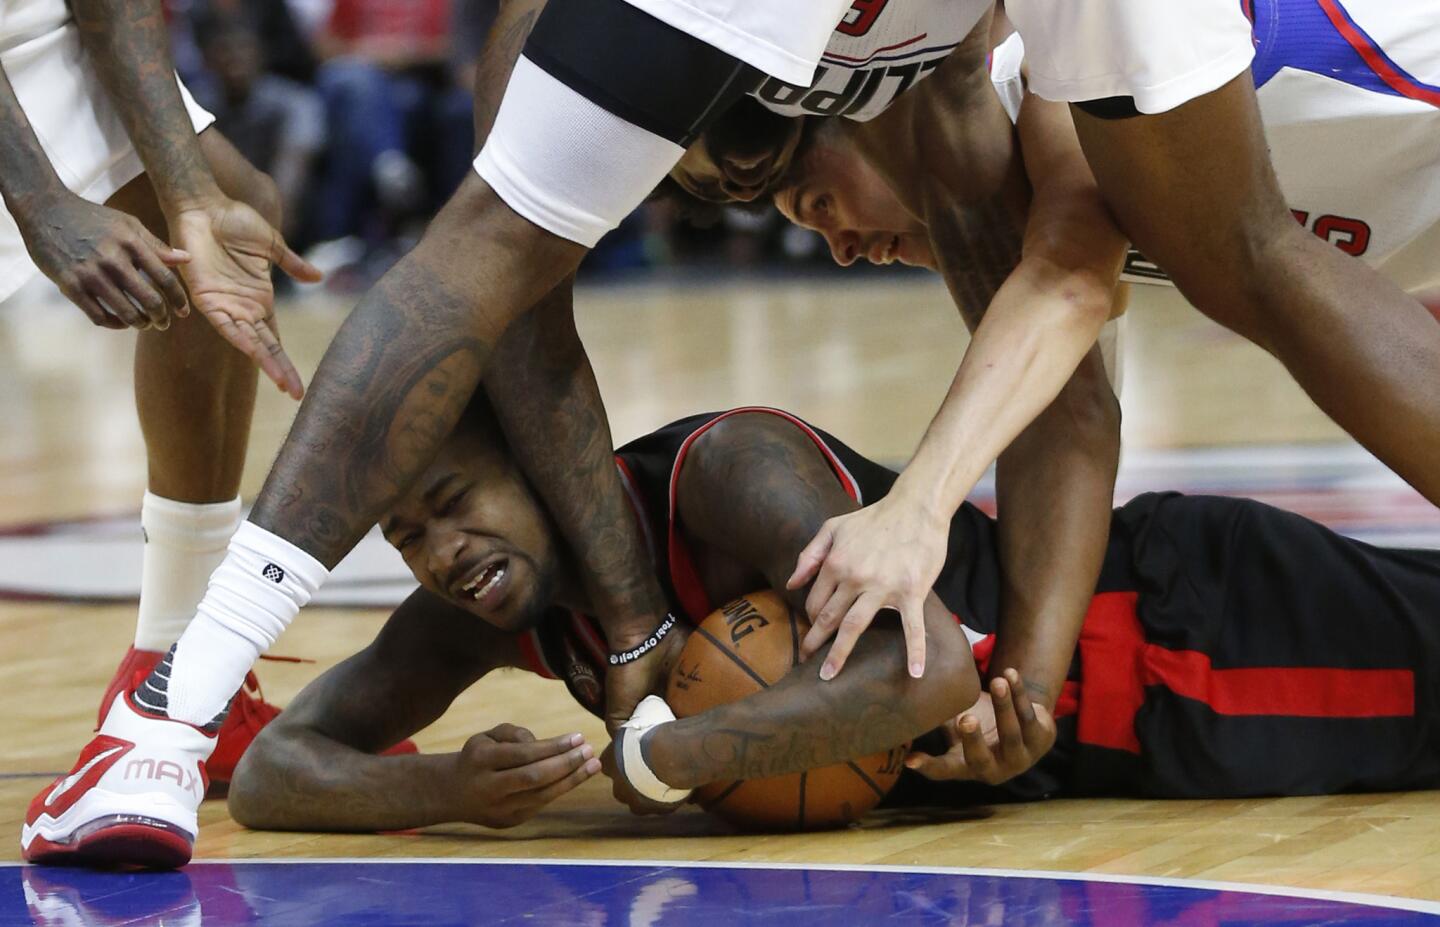 Raptors forward James Johnson is tied up by Clippers center DeAndre Jordan for a jump ball during the second half.